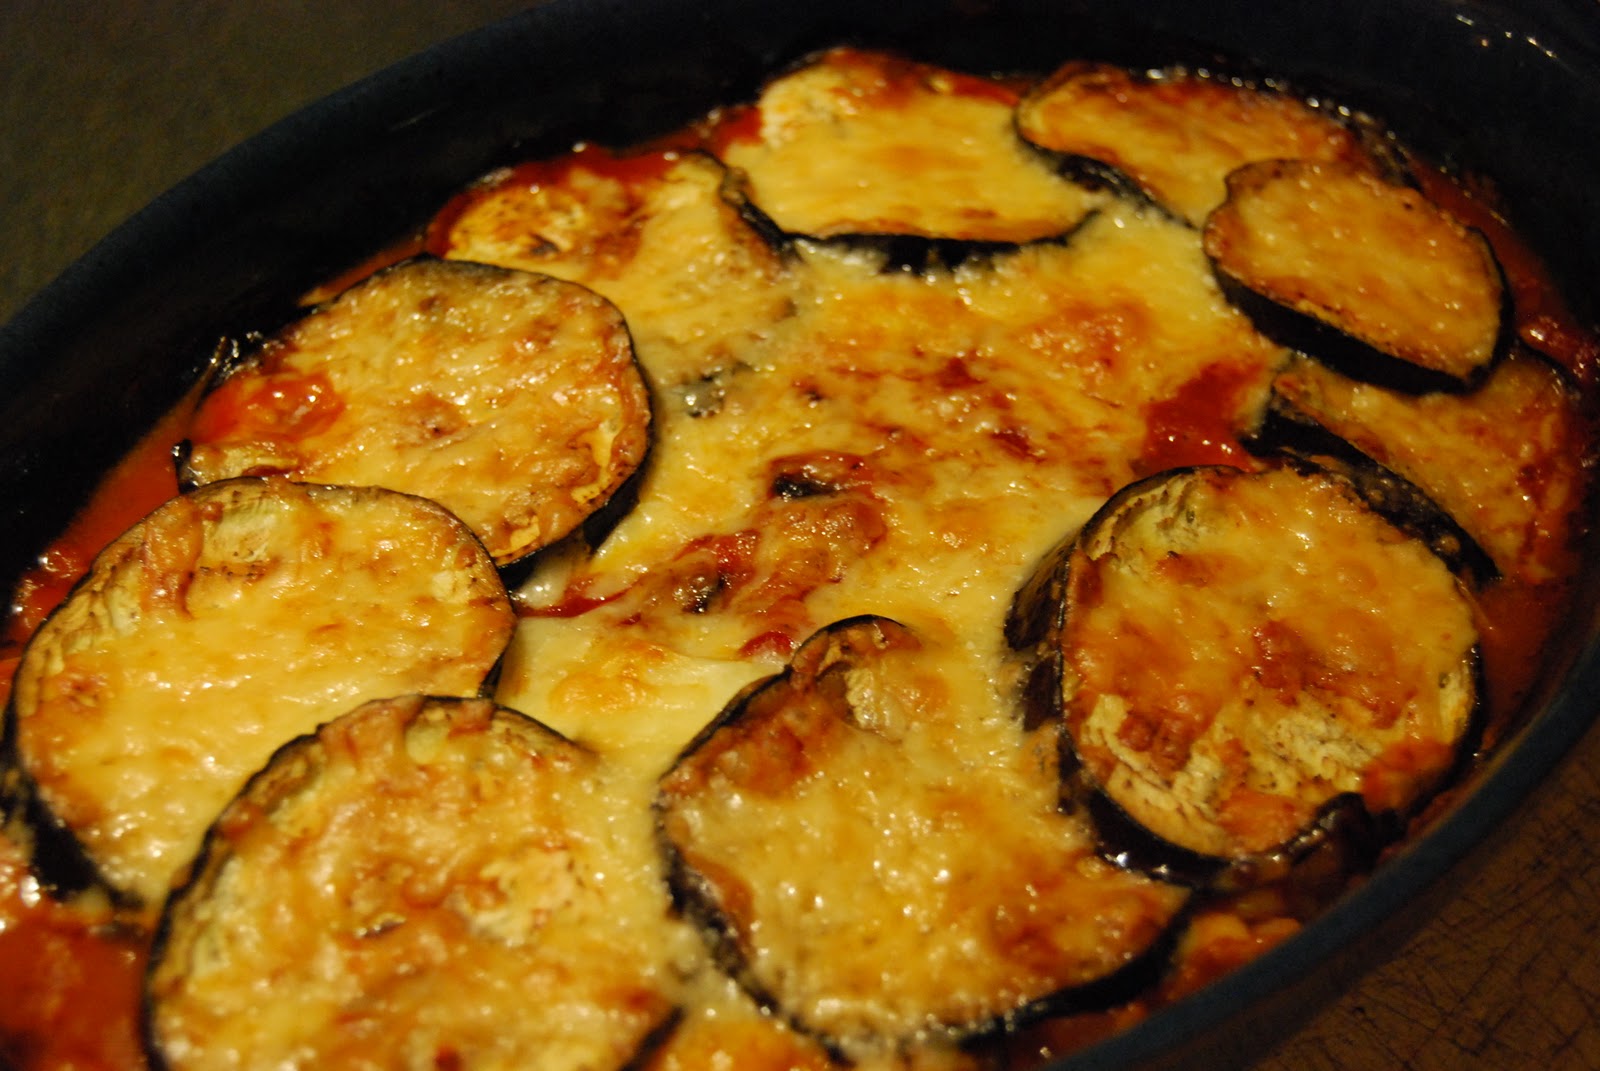 The Diary of an Unaccomplished Cook: Aubergine &amp; Mozzarella Bake